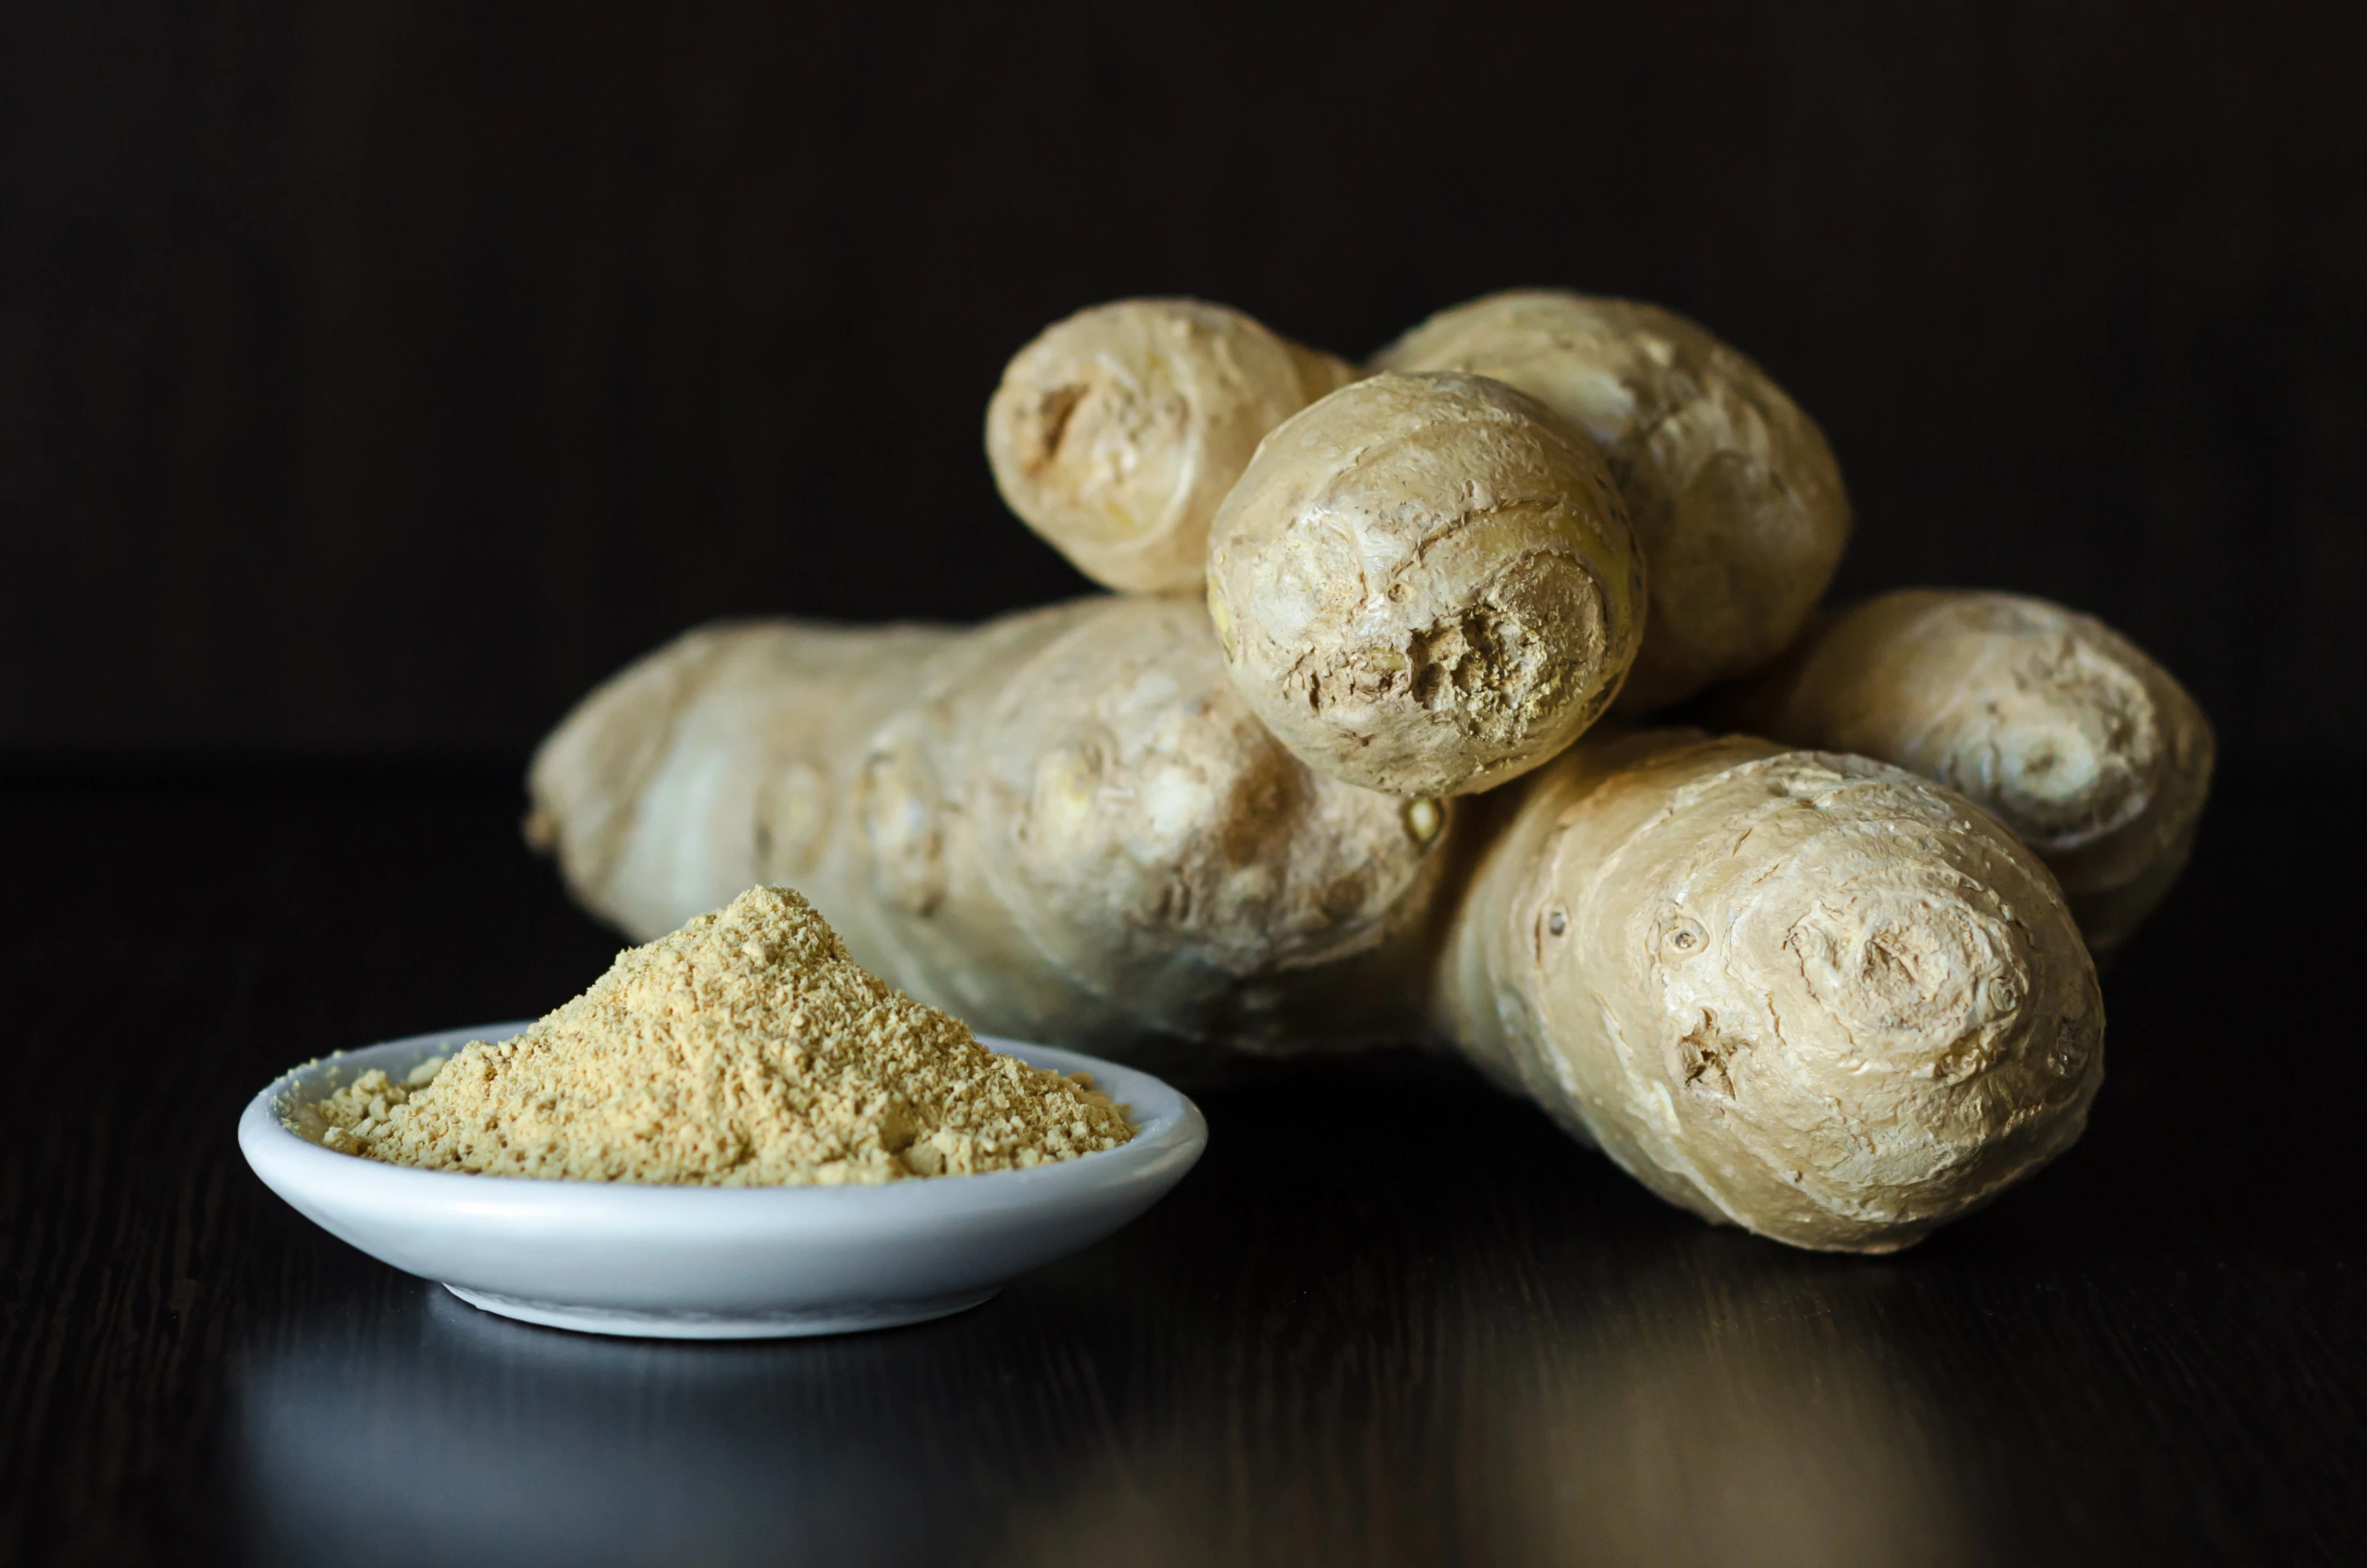 Ginger root and Ginger powder